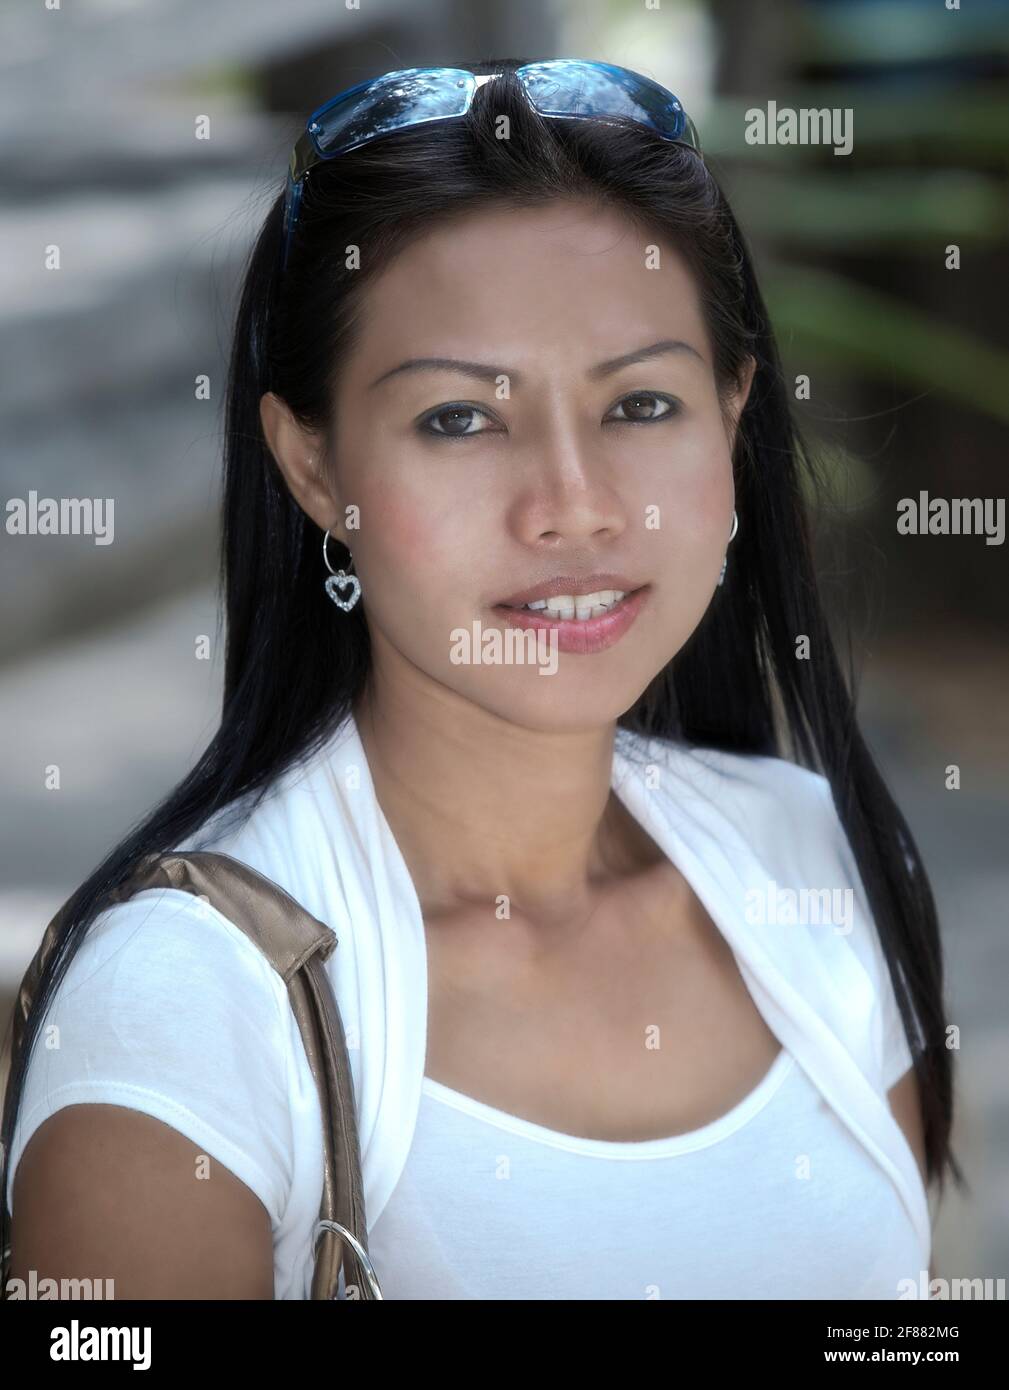 https://c8.alamy.com/comp/2F882MG/thailand-woman-portrait-of-a-30-year-old-thailand-beauty-thailand-s-e-asia-2F882MG.jpg